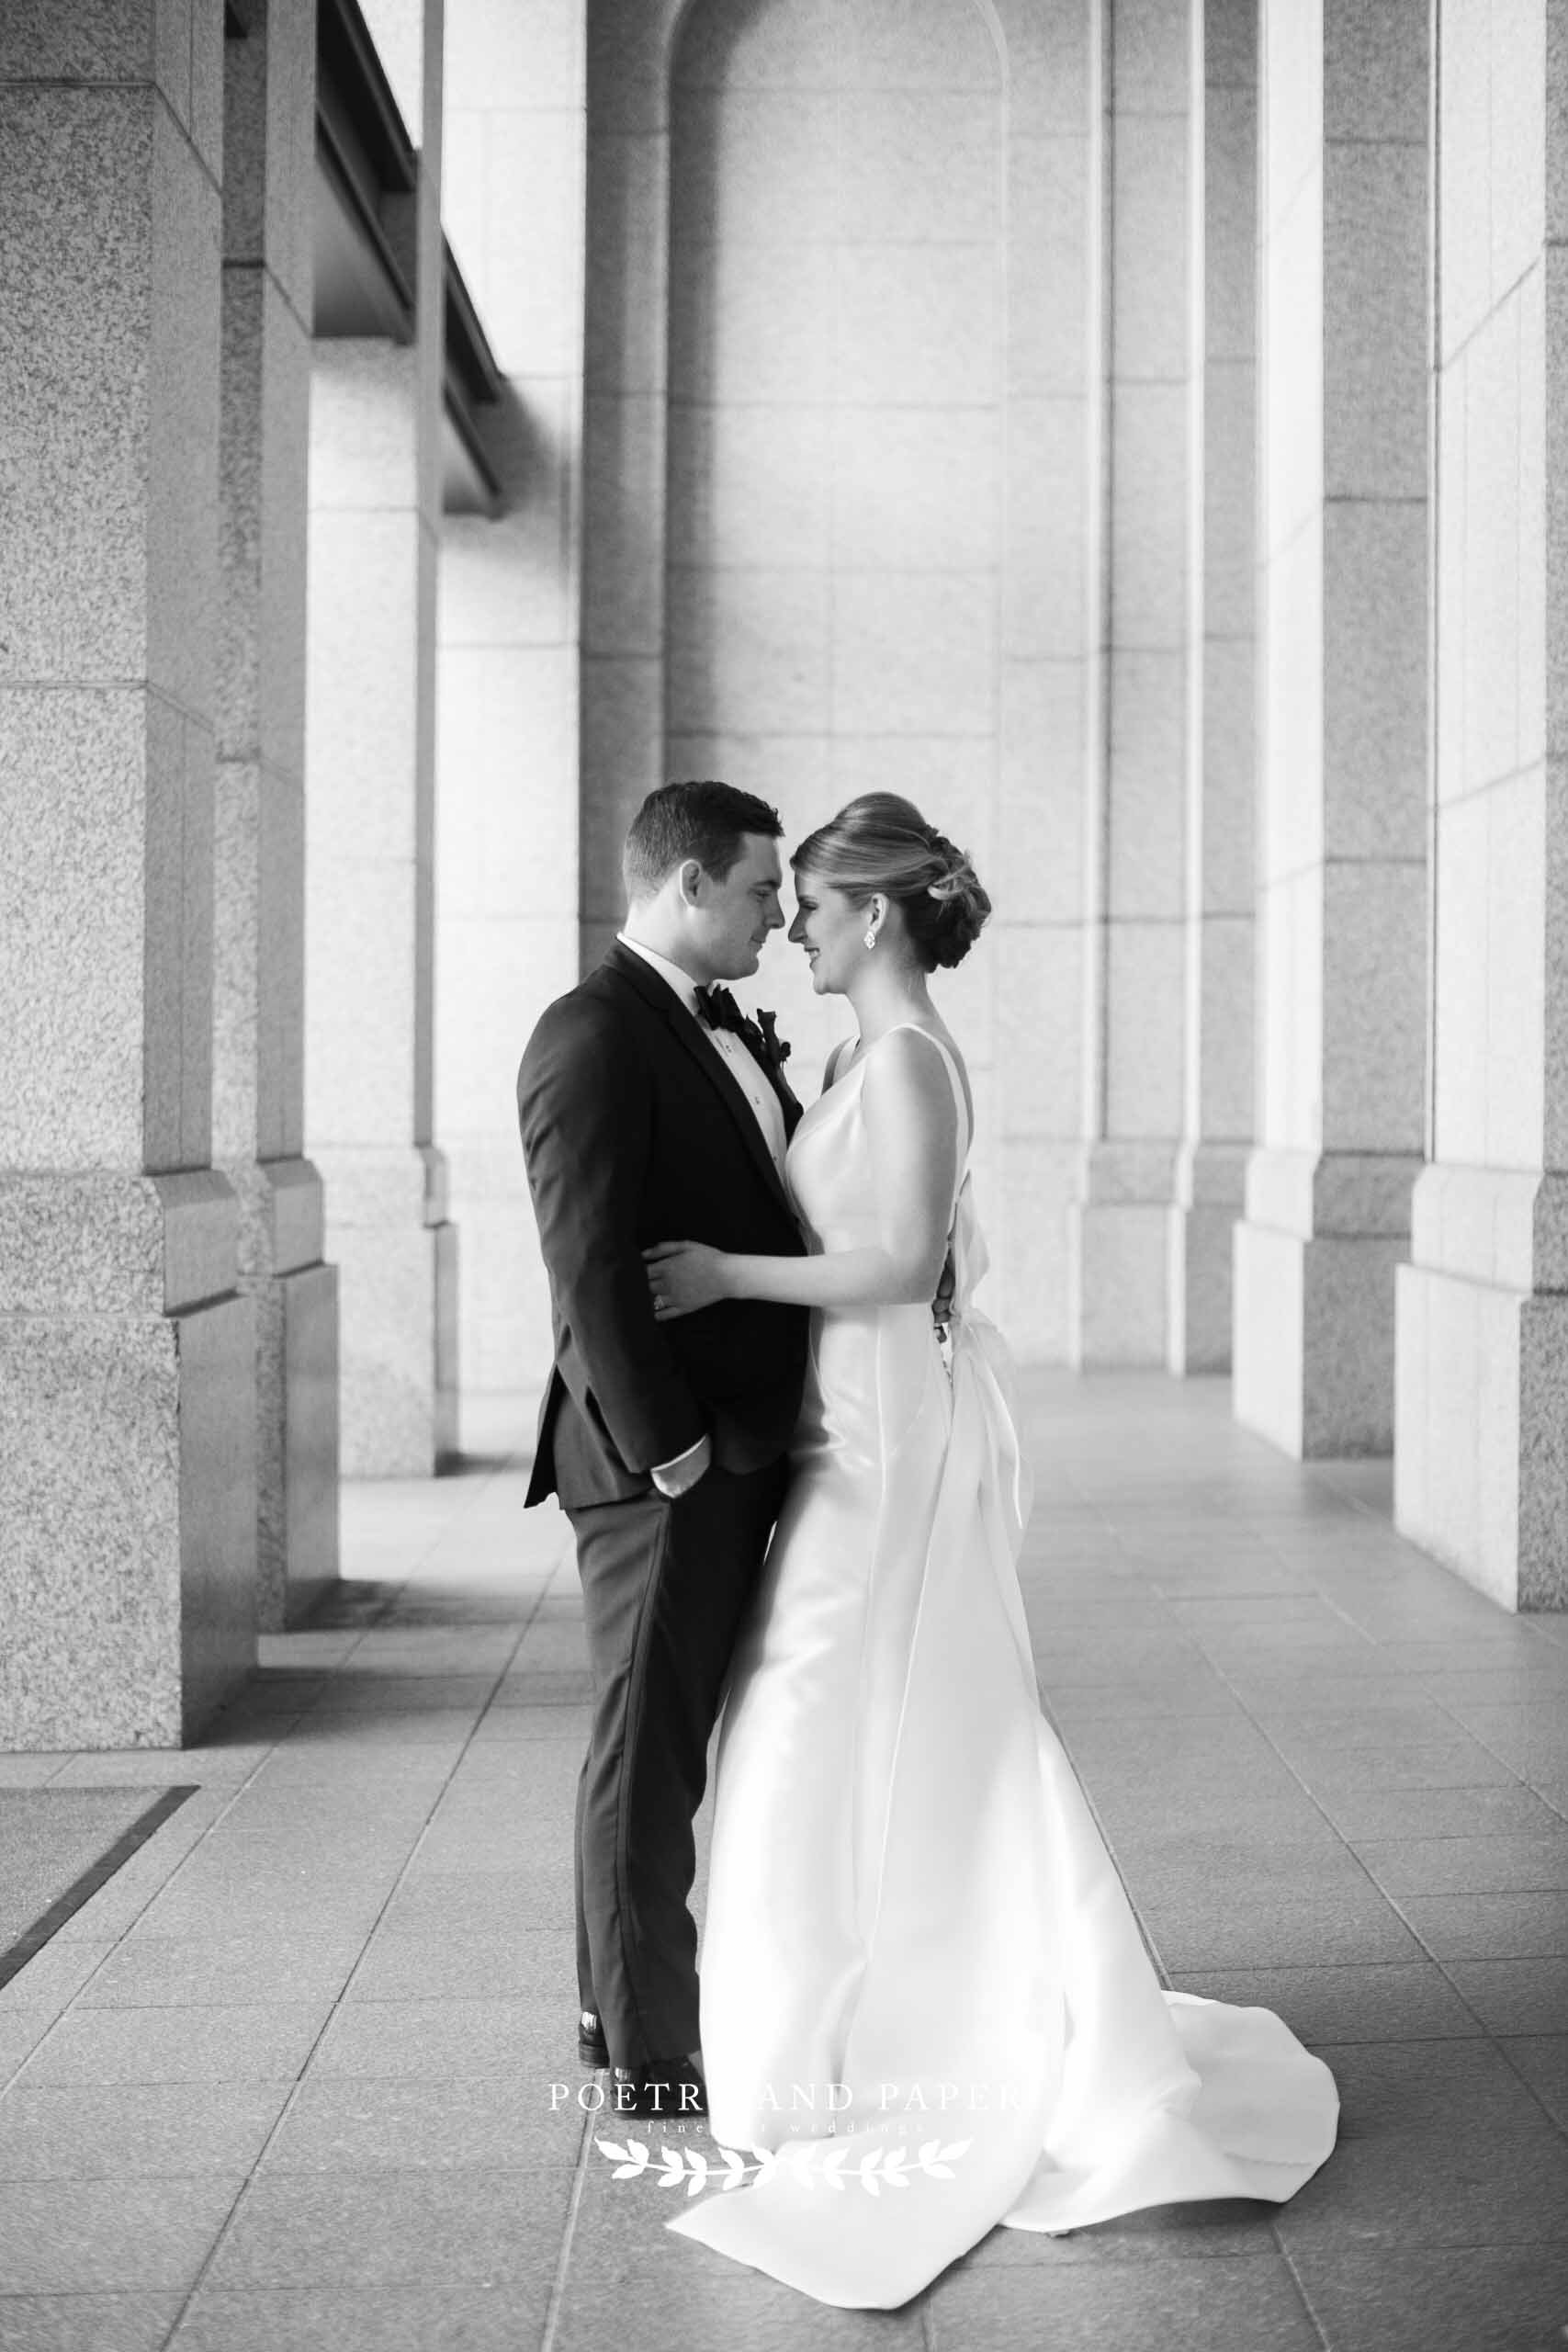 Ritz- Carlton Atlanta Wedding Photography- Poetry and Paper-Dawn Johnson- Black and white bride and groom.jpg